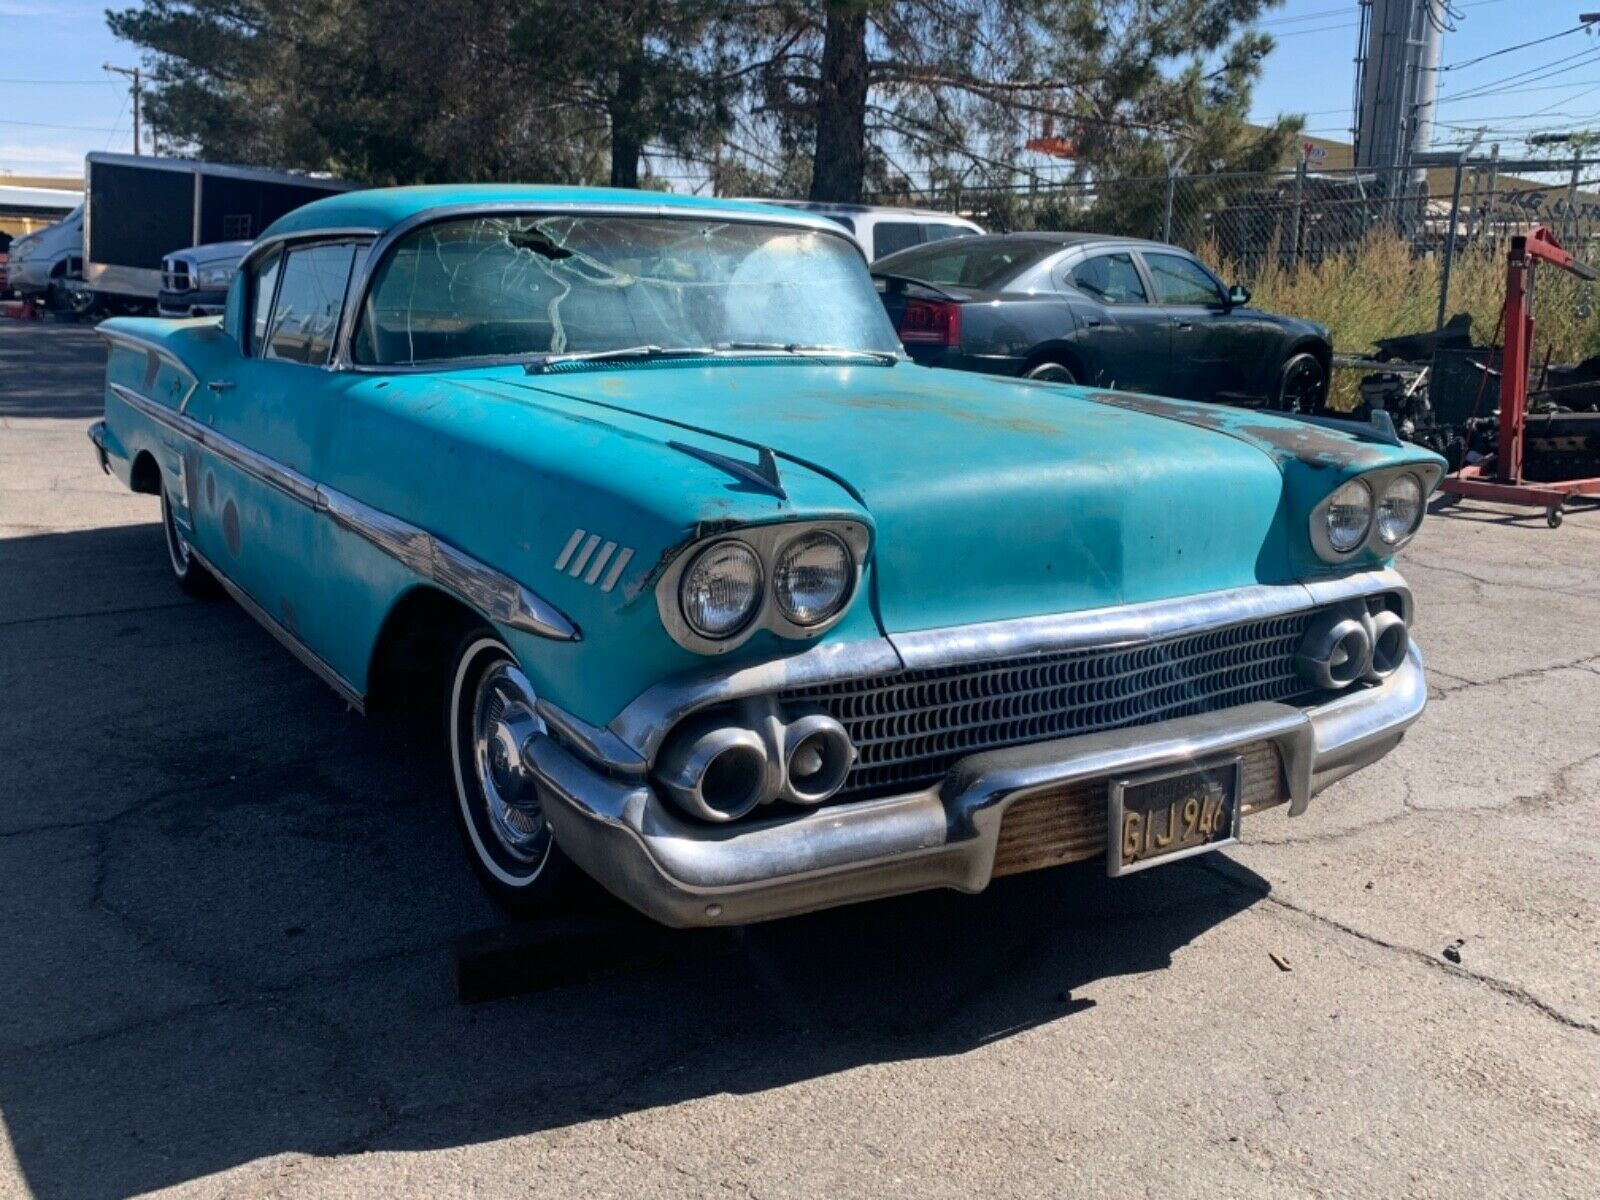 1958 Chevy Impala Barn Find Front Quarter View